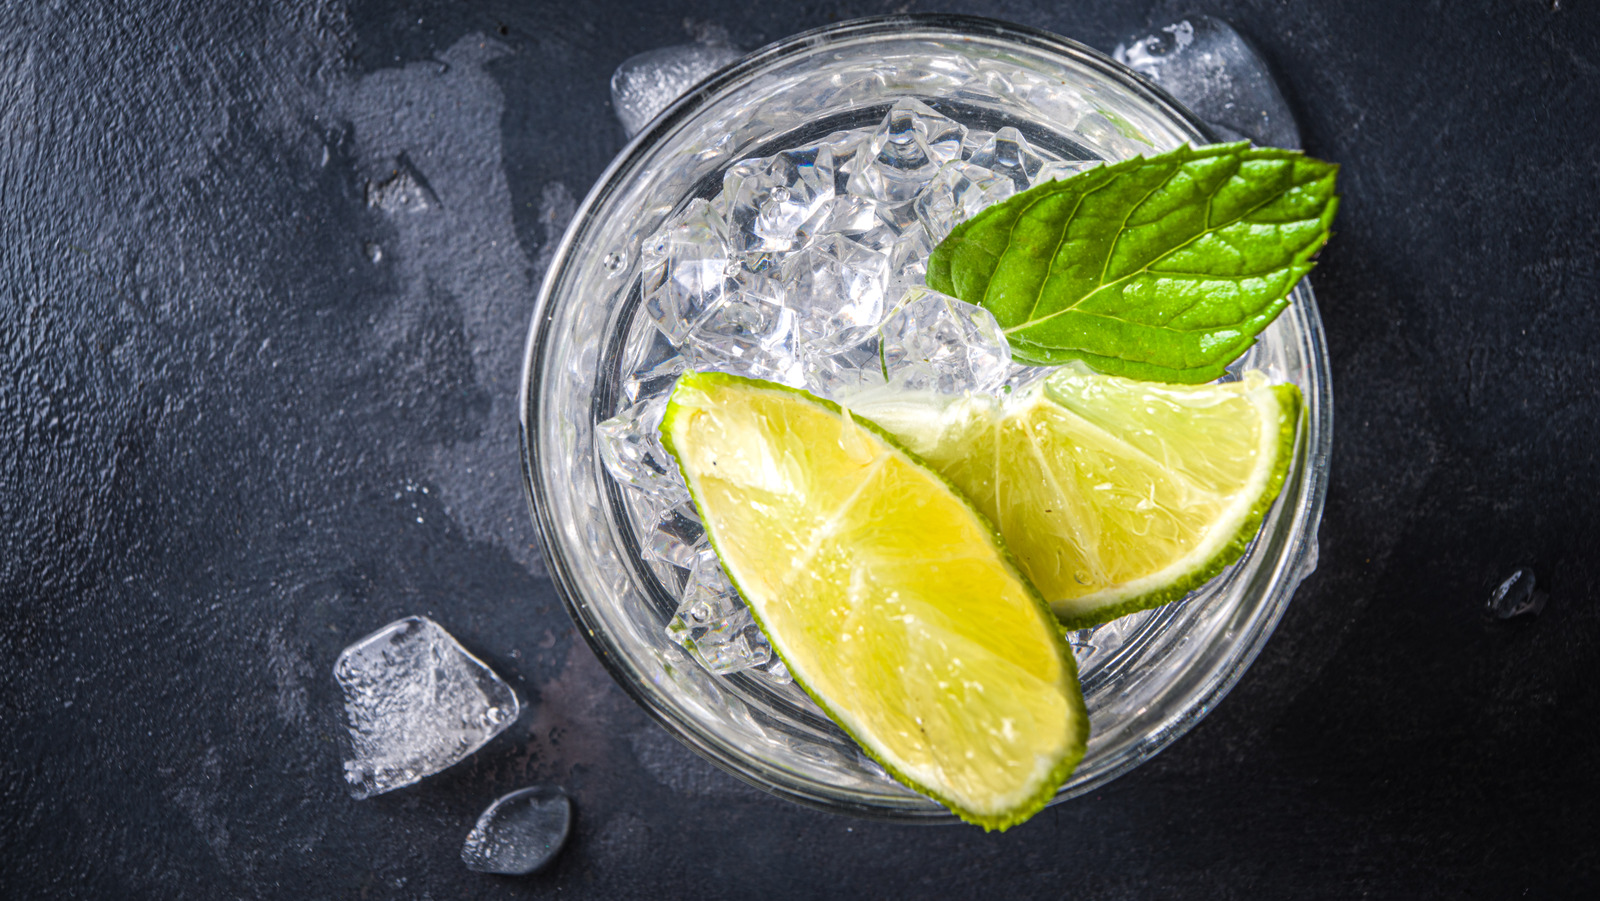 12 Best Drinks To Mix With Vodka, Ranked